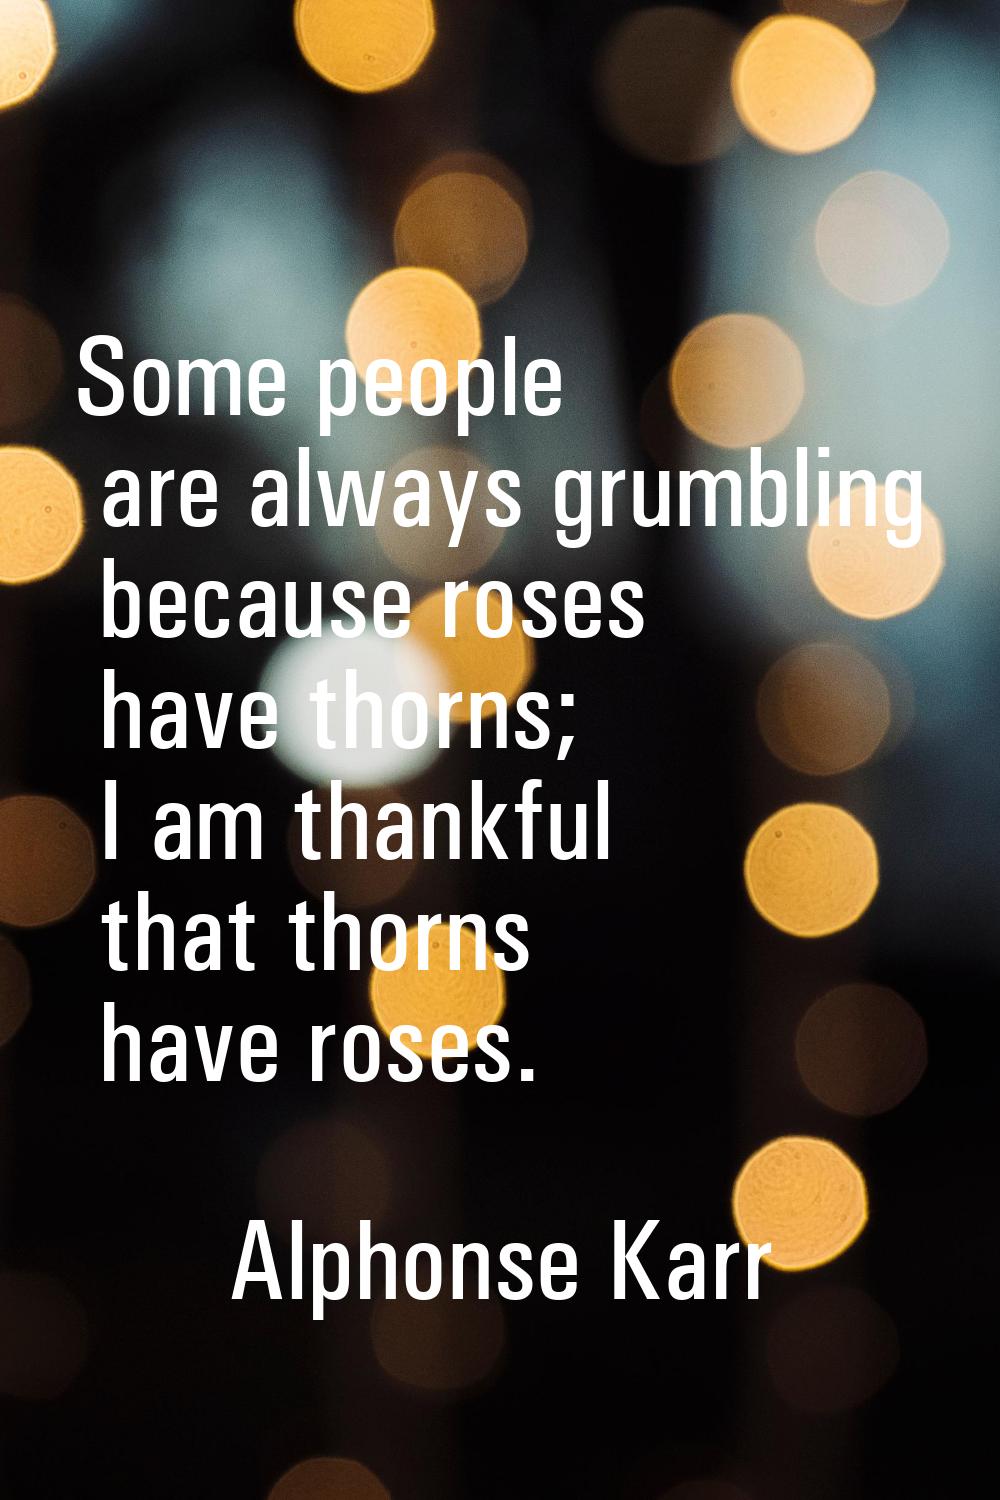 Some people are always grumbling because roses have thorns; I am thankful that thorns have roses.